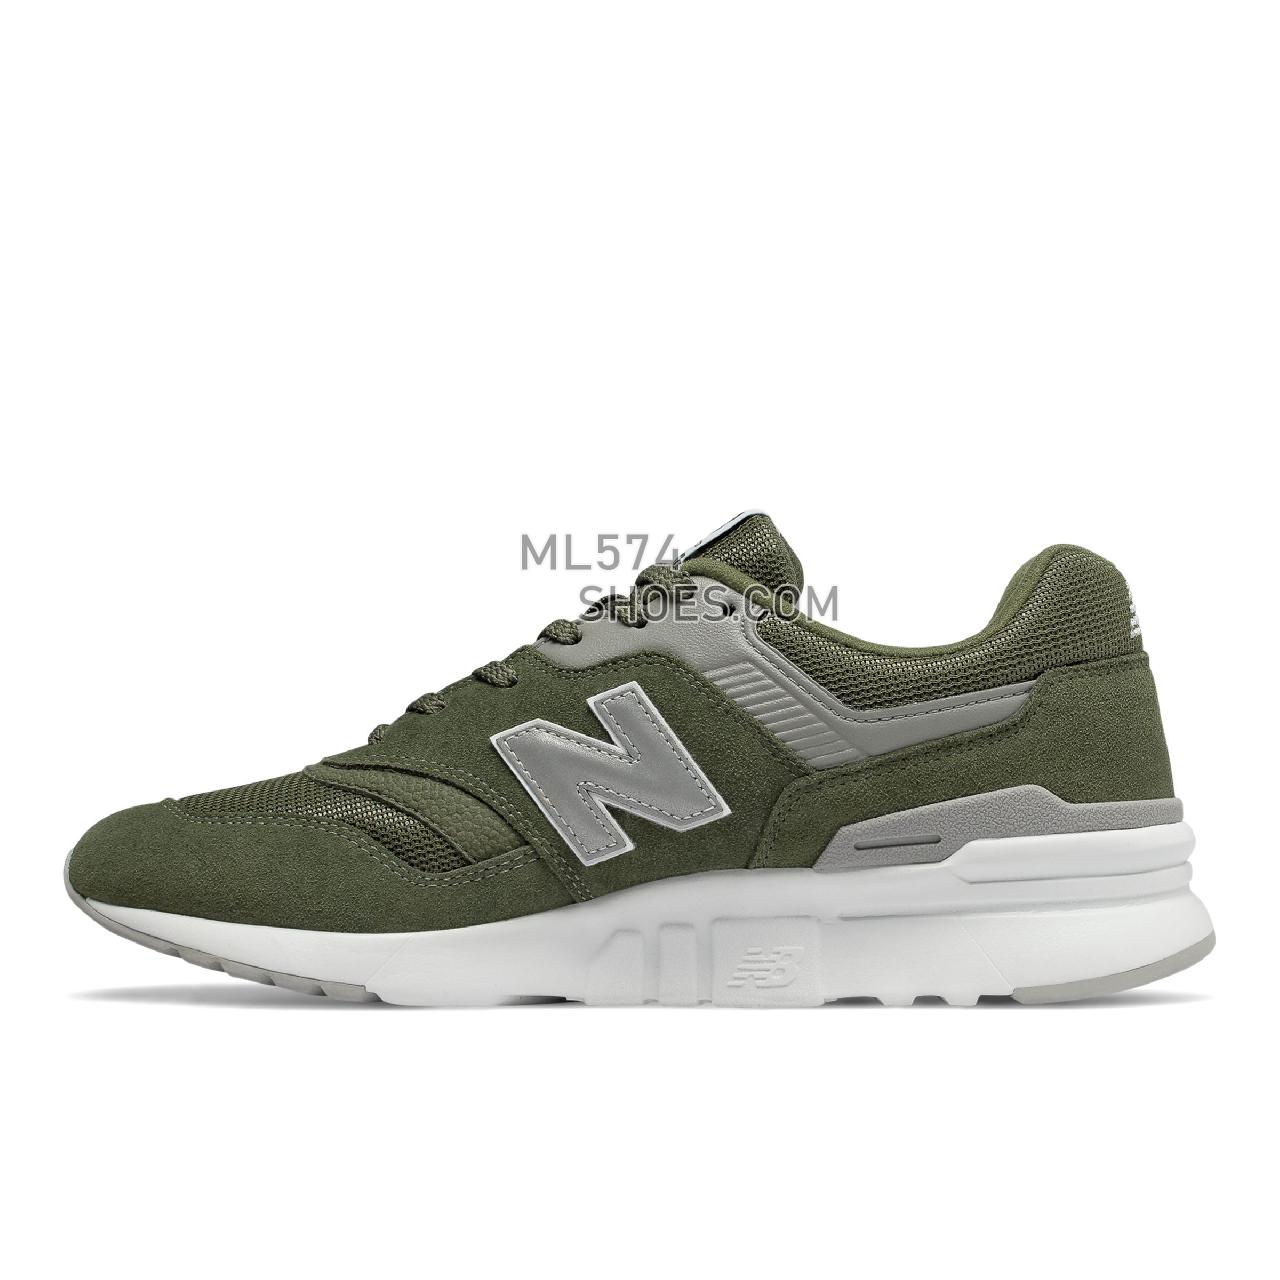 New Balance 997H - Men's Sport Style Sneakers - Dark Covert Green with Silver - CM997HCG